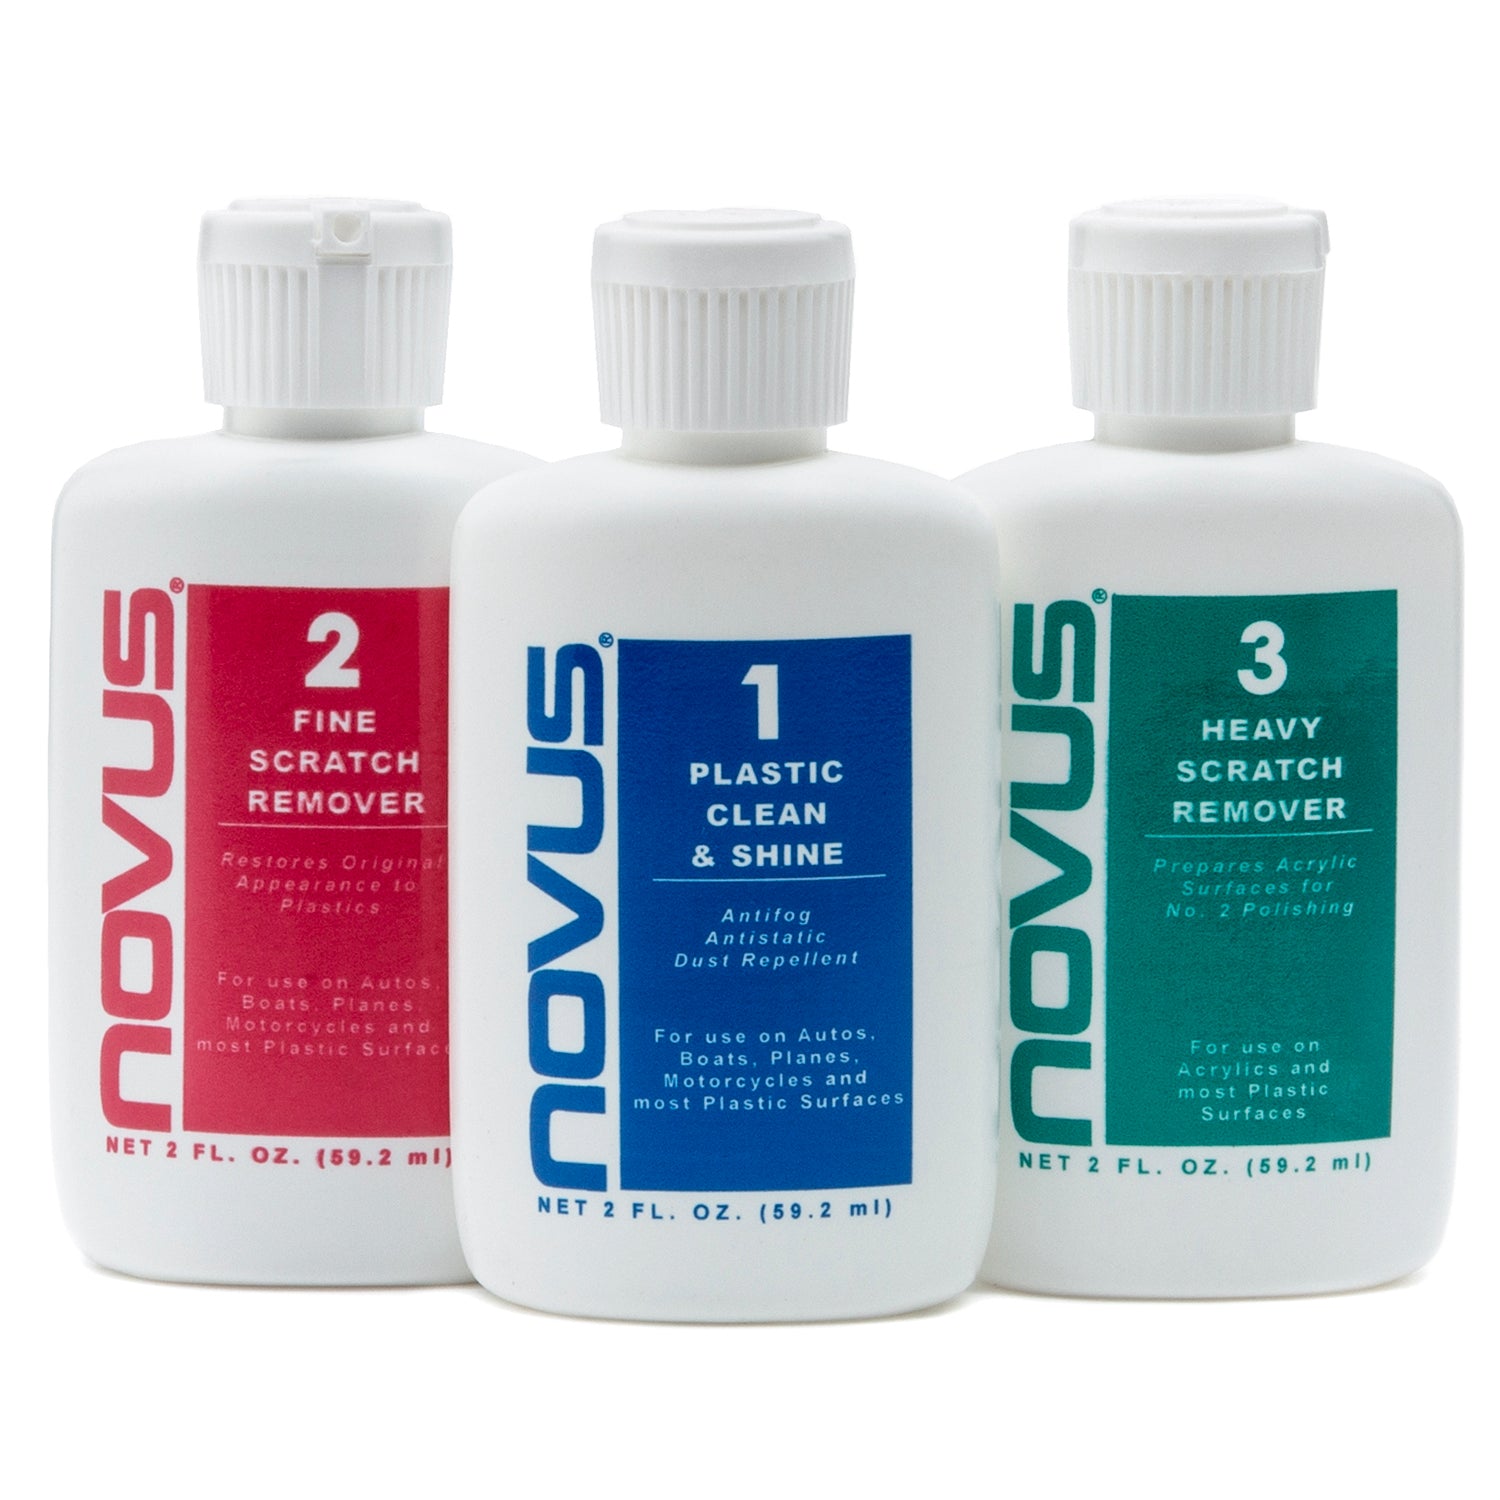 Novus #1 Clean and Shine Acrylic Cleaner